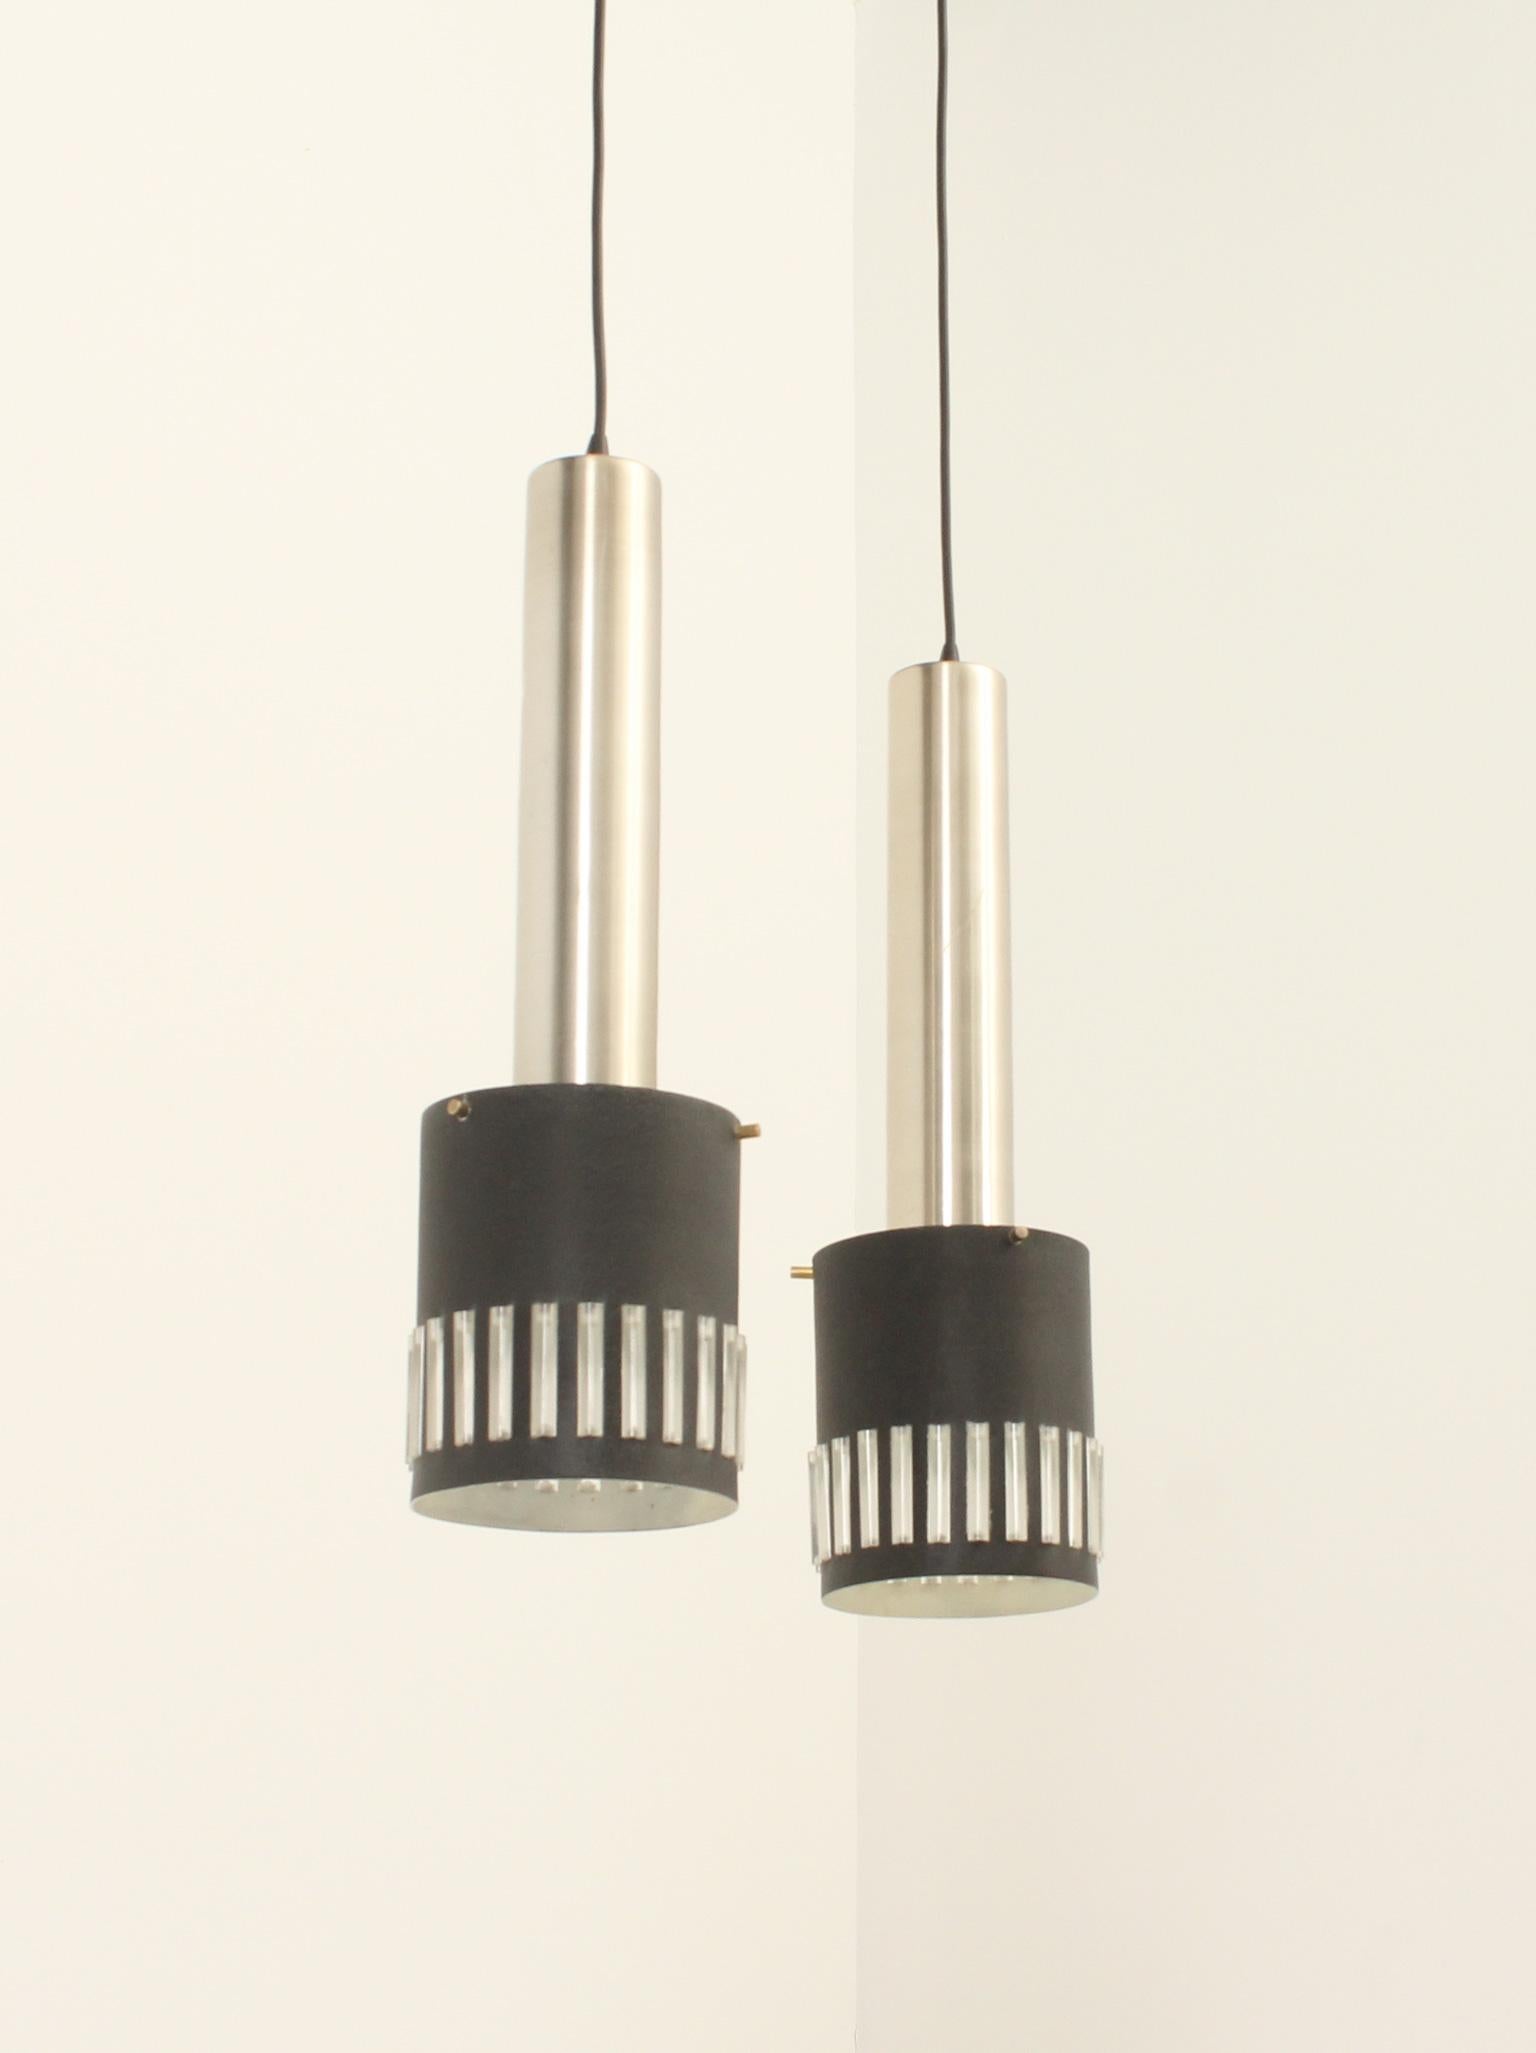 Mid-Century Modern Pair of Pendant Lamps from 1960's, Spain For Sale